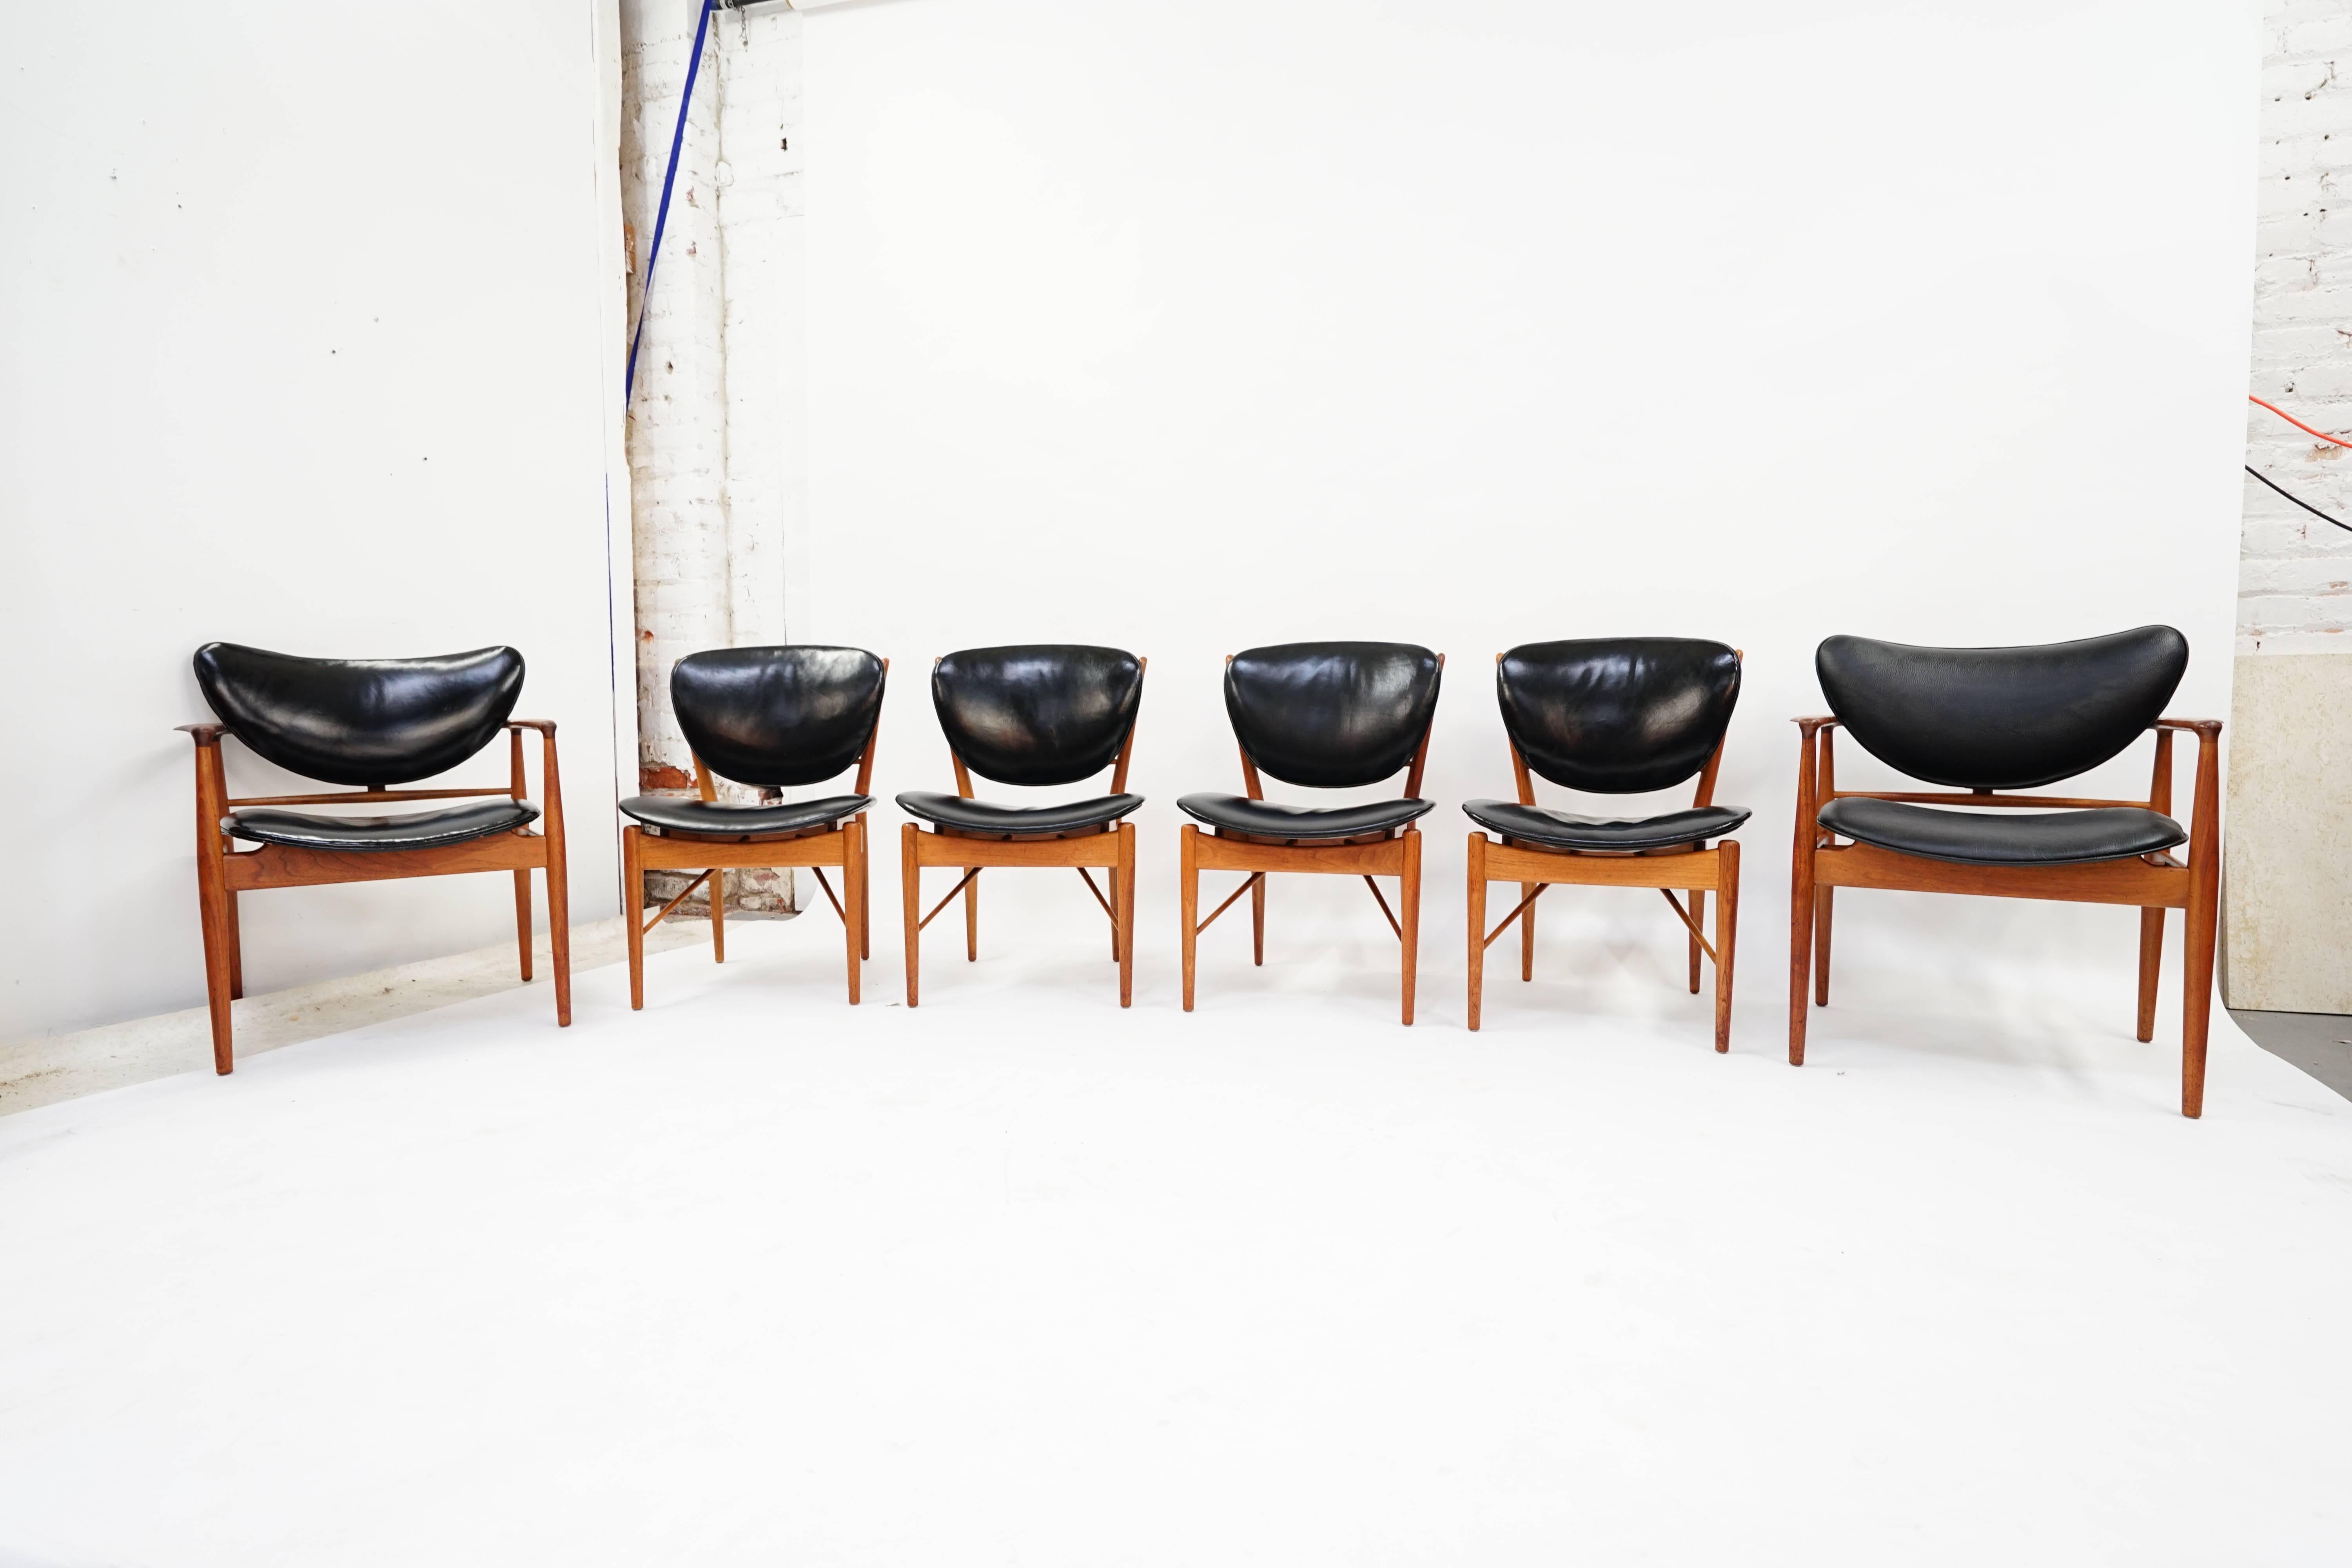 Absolutely Stunning set of 6 Early Finn Juhl Walnut Dining Chairs with the Original Thick Black Ox Hide Leather Upholstery, 2 NV-48 Armchairs and 4 NV-51 Side chairs, Circa 1951